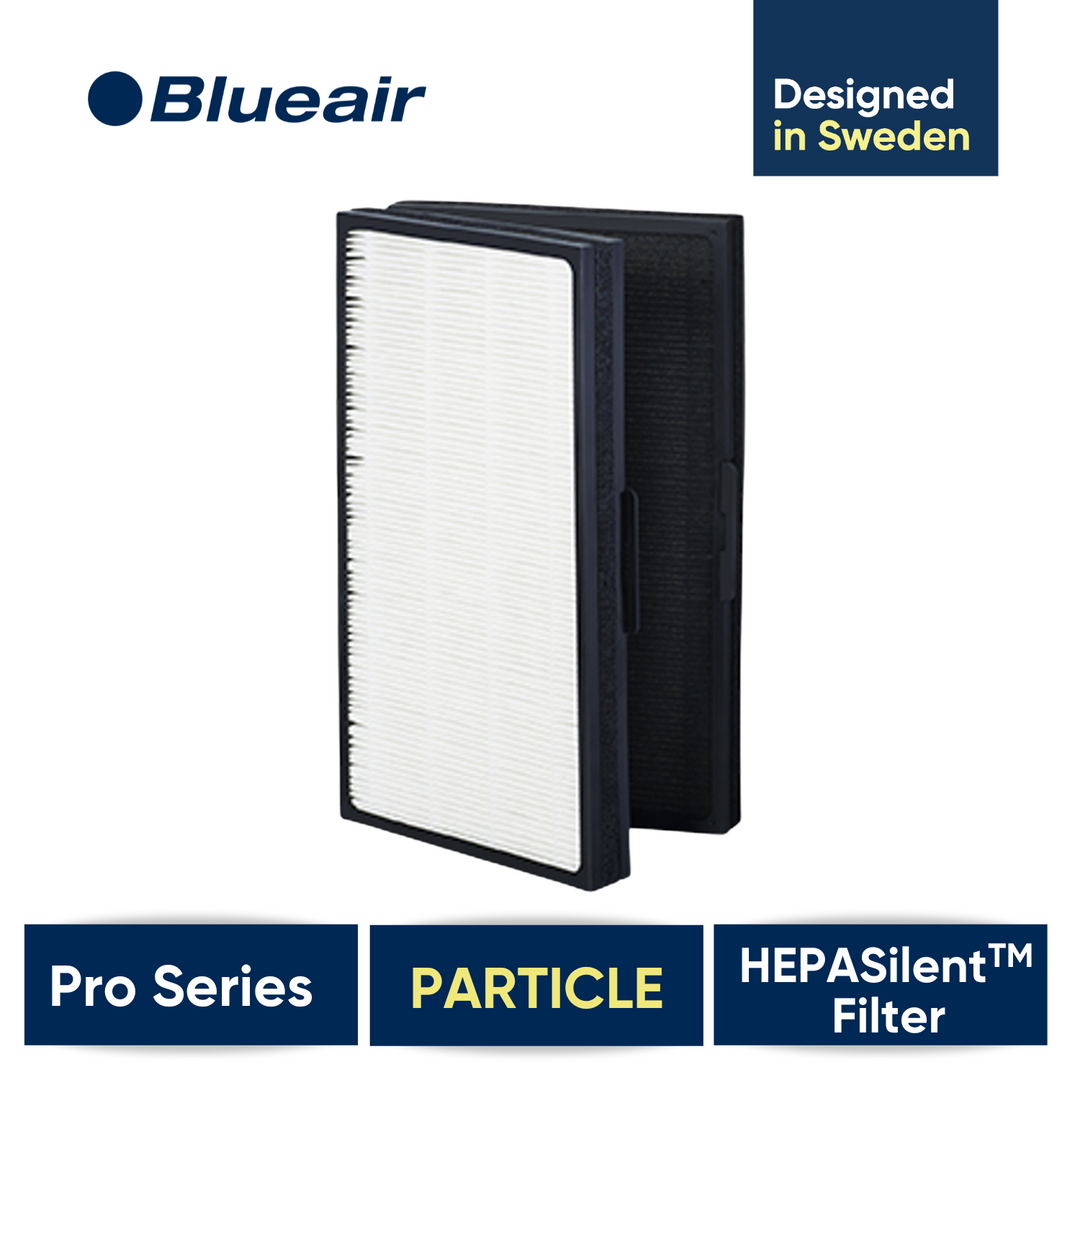 Blueair Pro Particle Filter